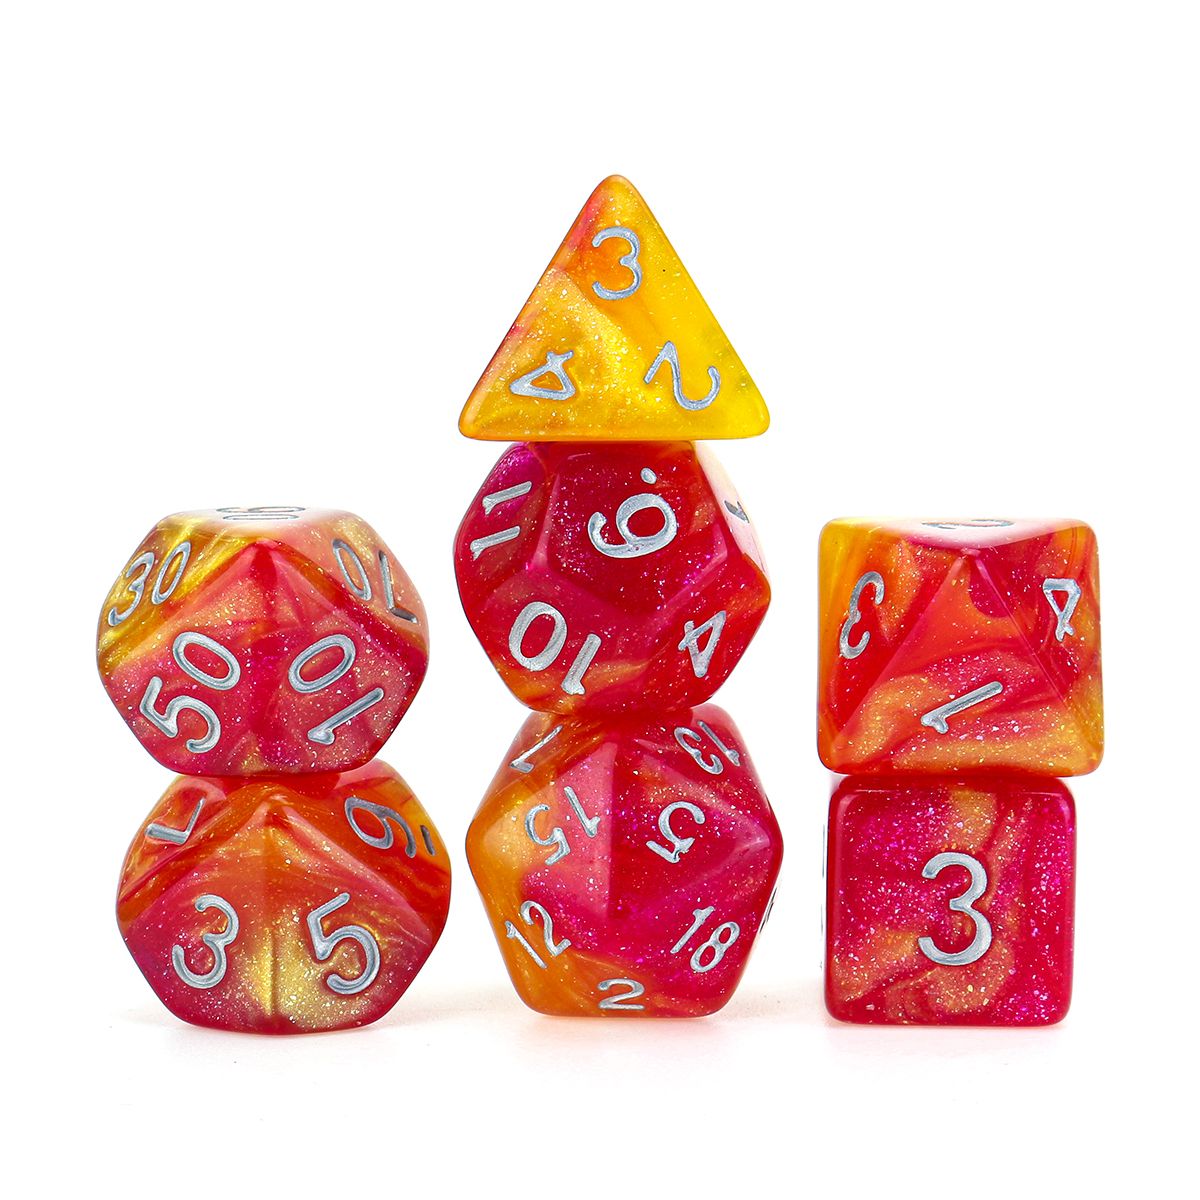 7pcsSet-Polyhedral-Dices-for-DND-RPG-MTG-Game-Dungeons-amp-Dragons-D4-D20-Colors-Dice-1633756